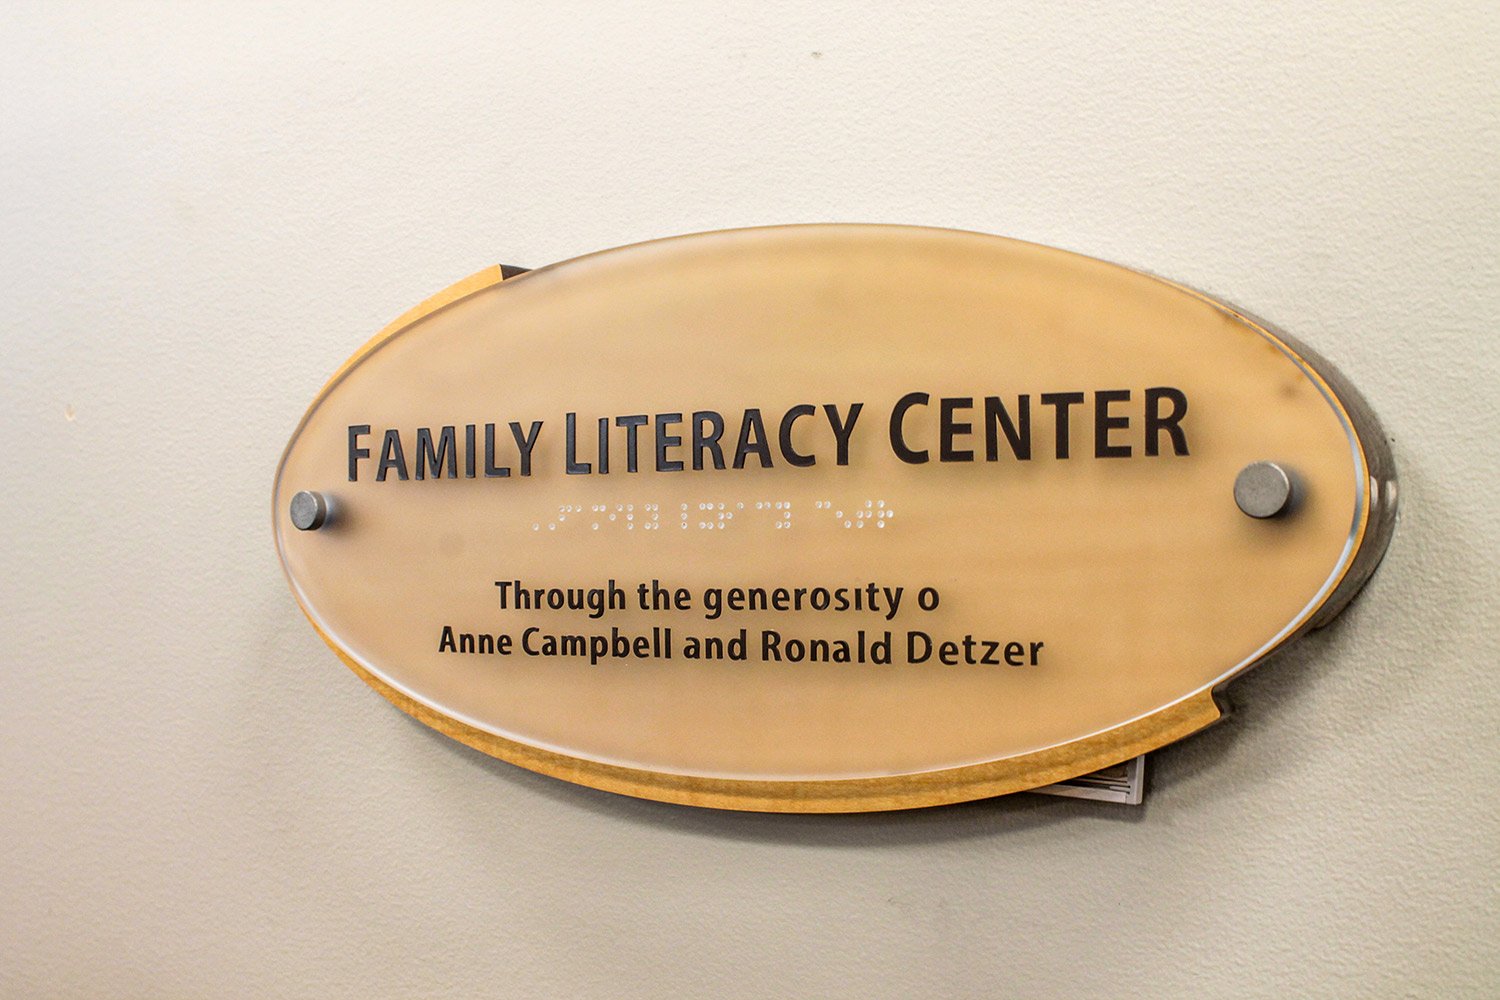 300-national-city-library--family-literacy